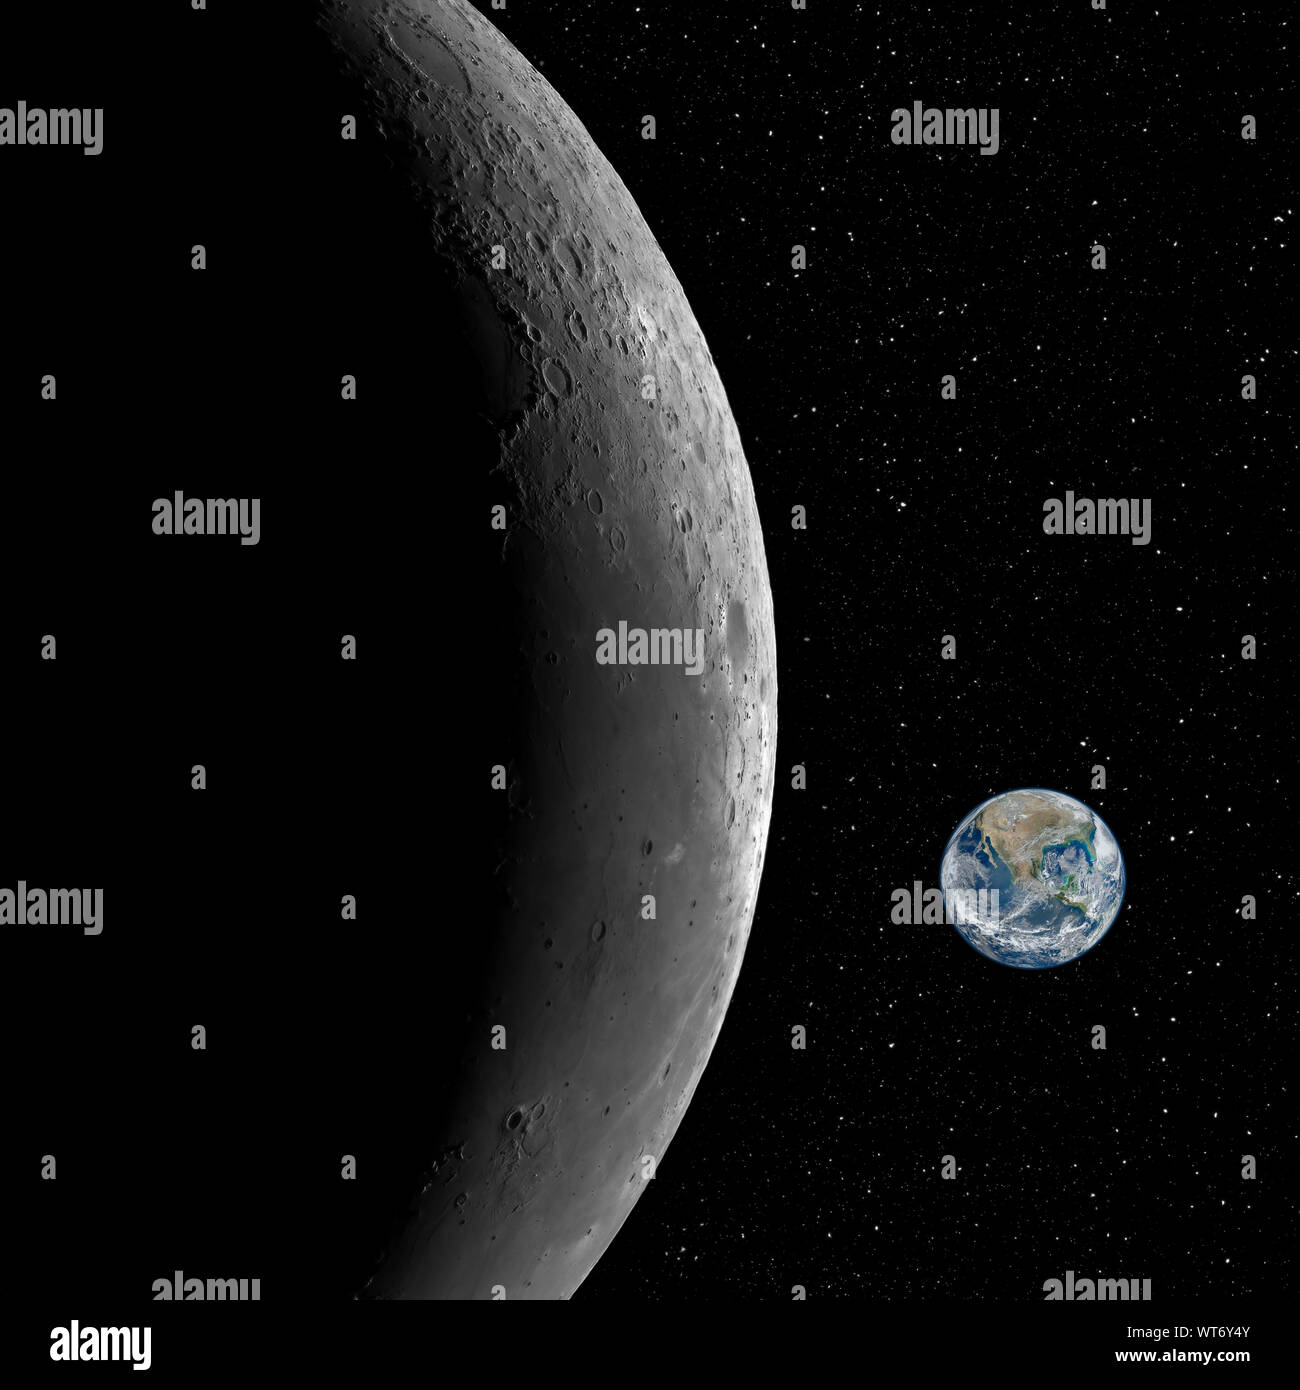 Closeup of the Moon and the small planet Earth against starry night sky background, elements of this image furnished by NASA Stock Photo